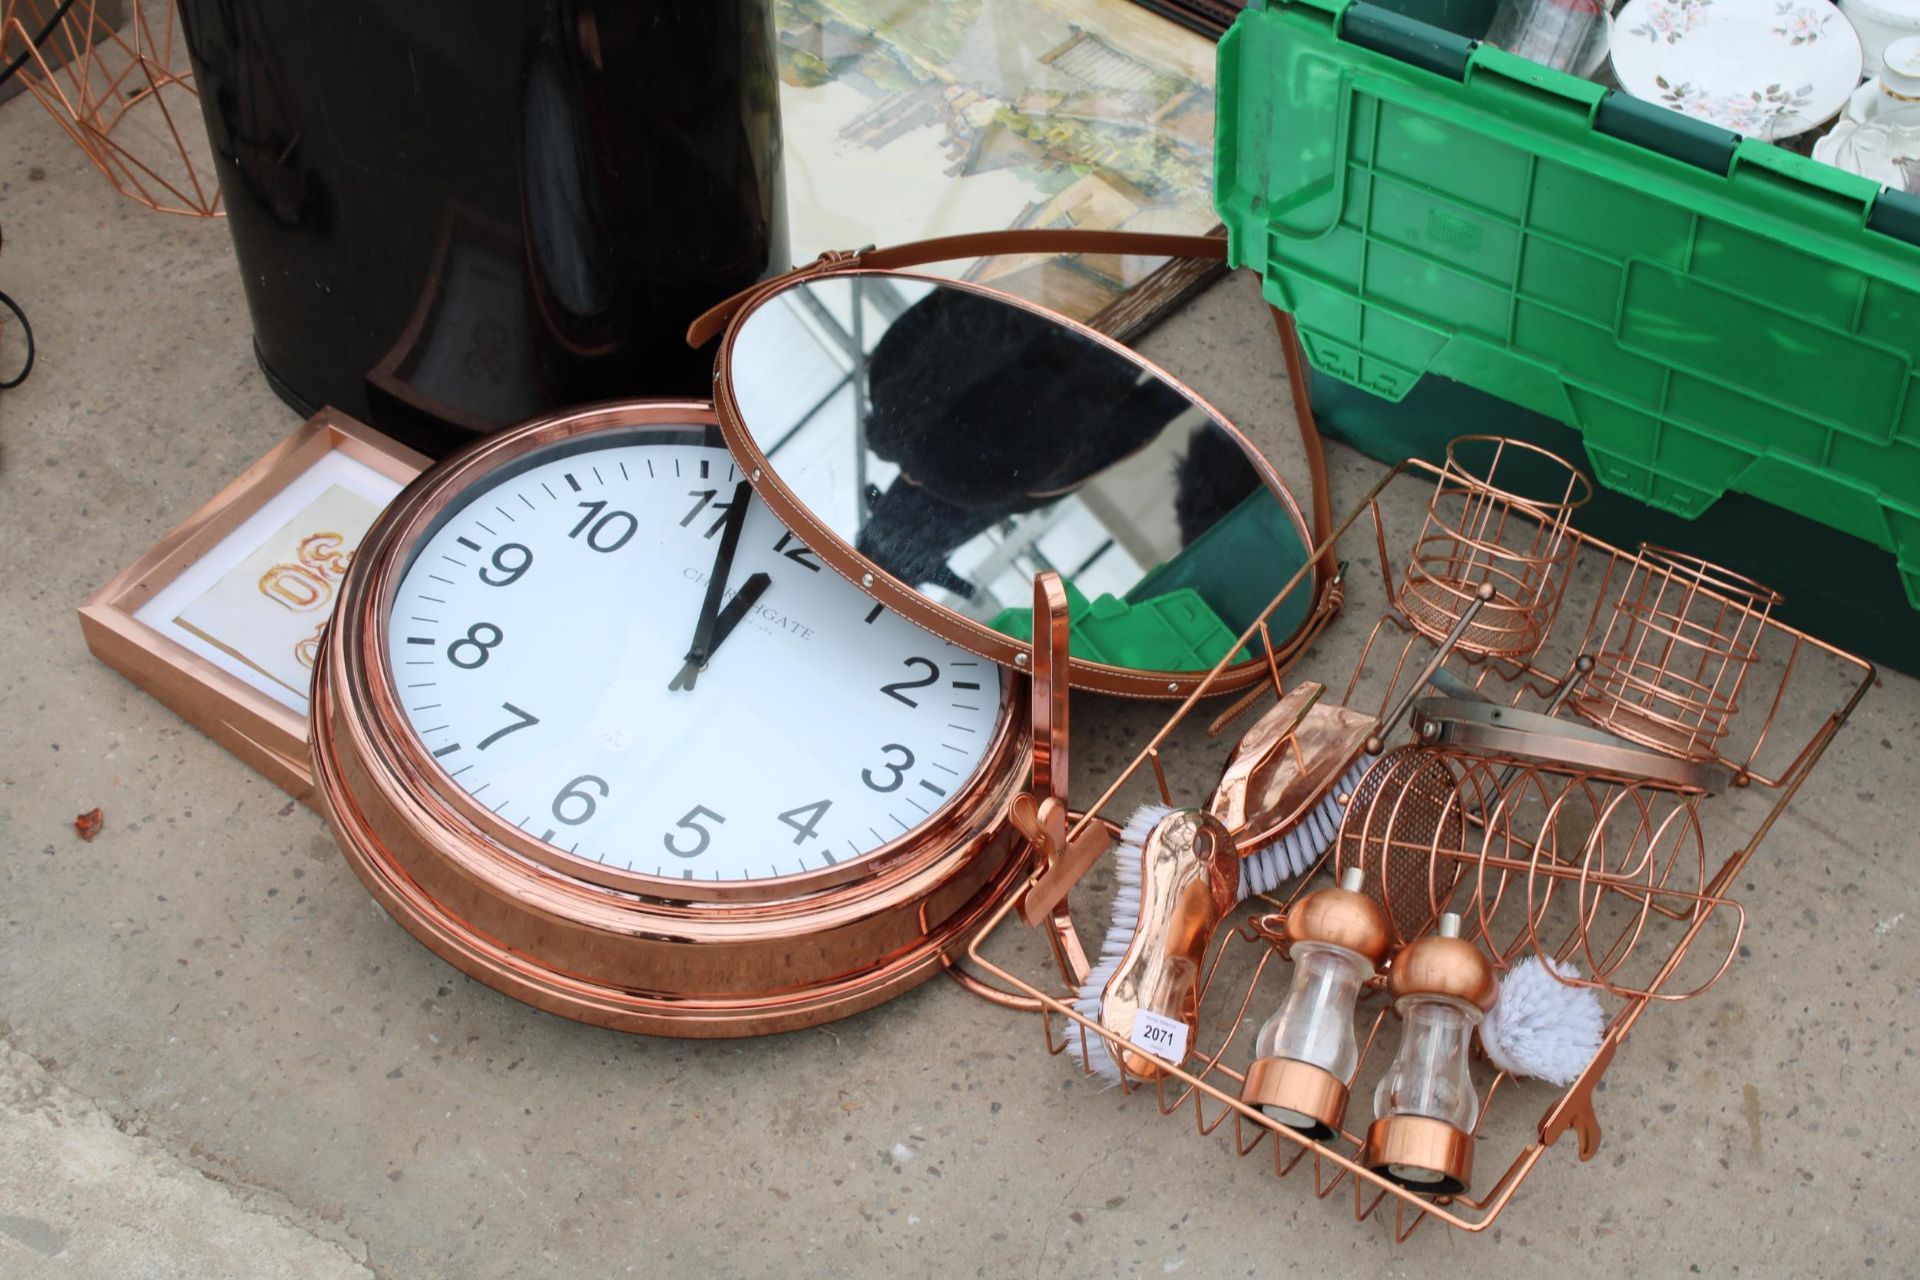 A LARGE ASSORTMENT OF ITEMS TO INCLUDE CLOCKS, MIRRORS, A BIN AND PANS ETC - Image 2 of 7